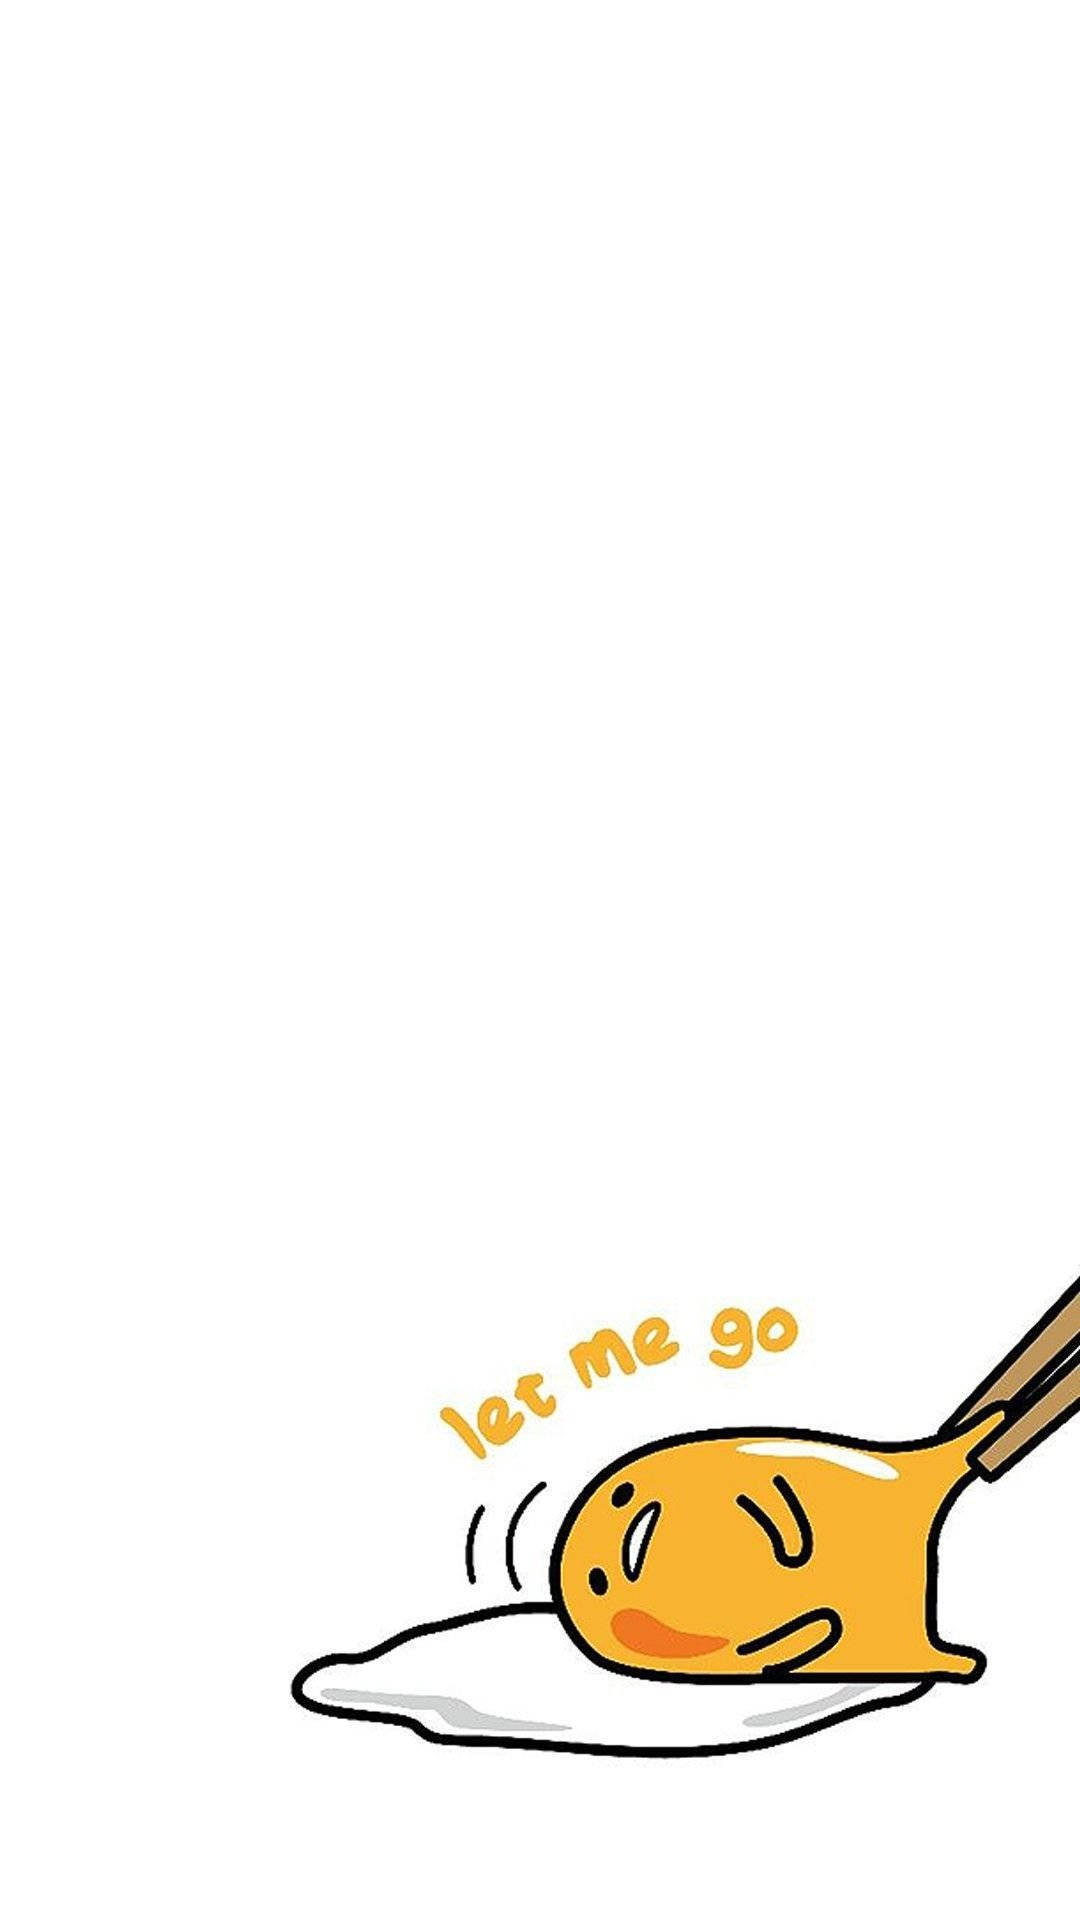 "This Gudetama Aesthetic perfectly sums up my mood" Wallpaper